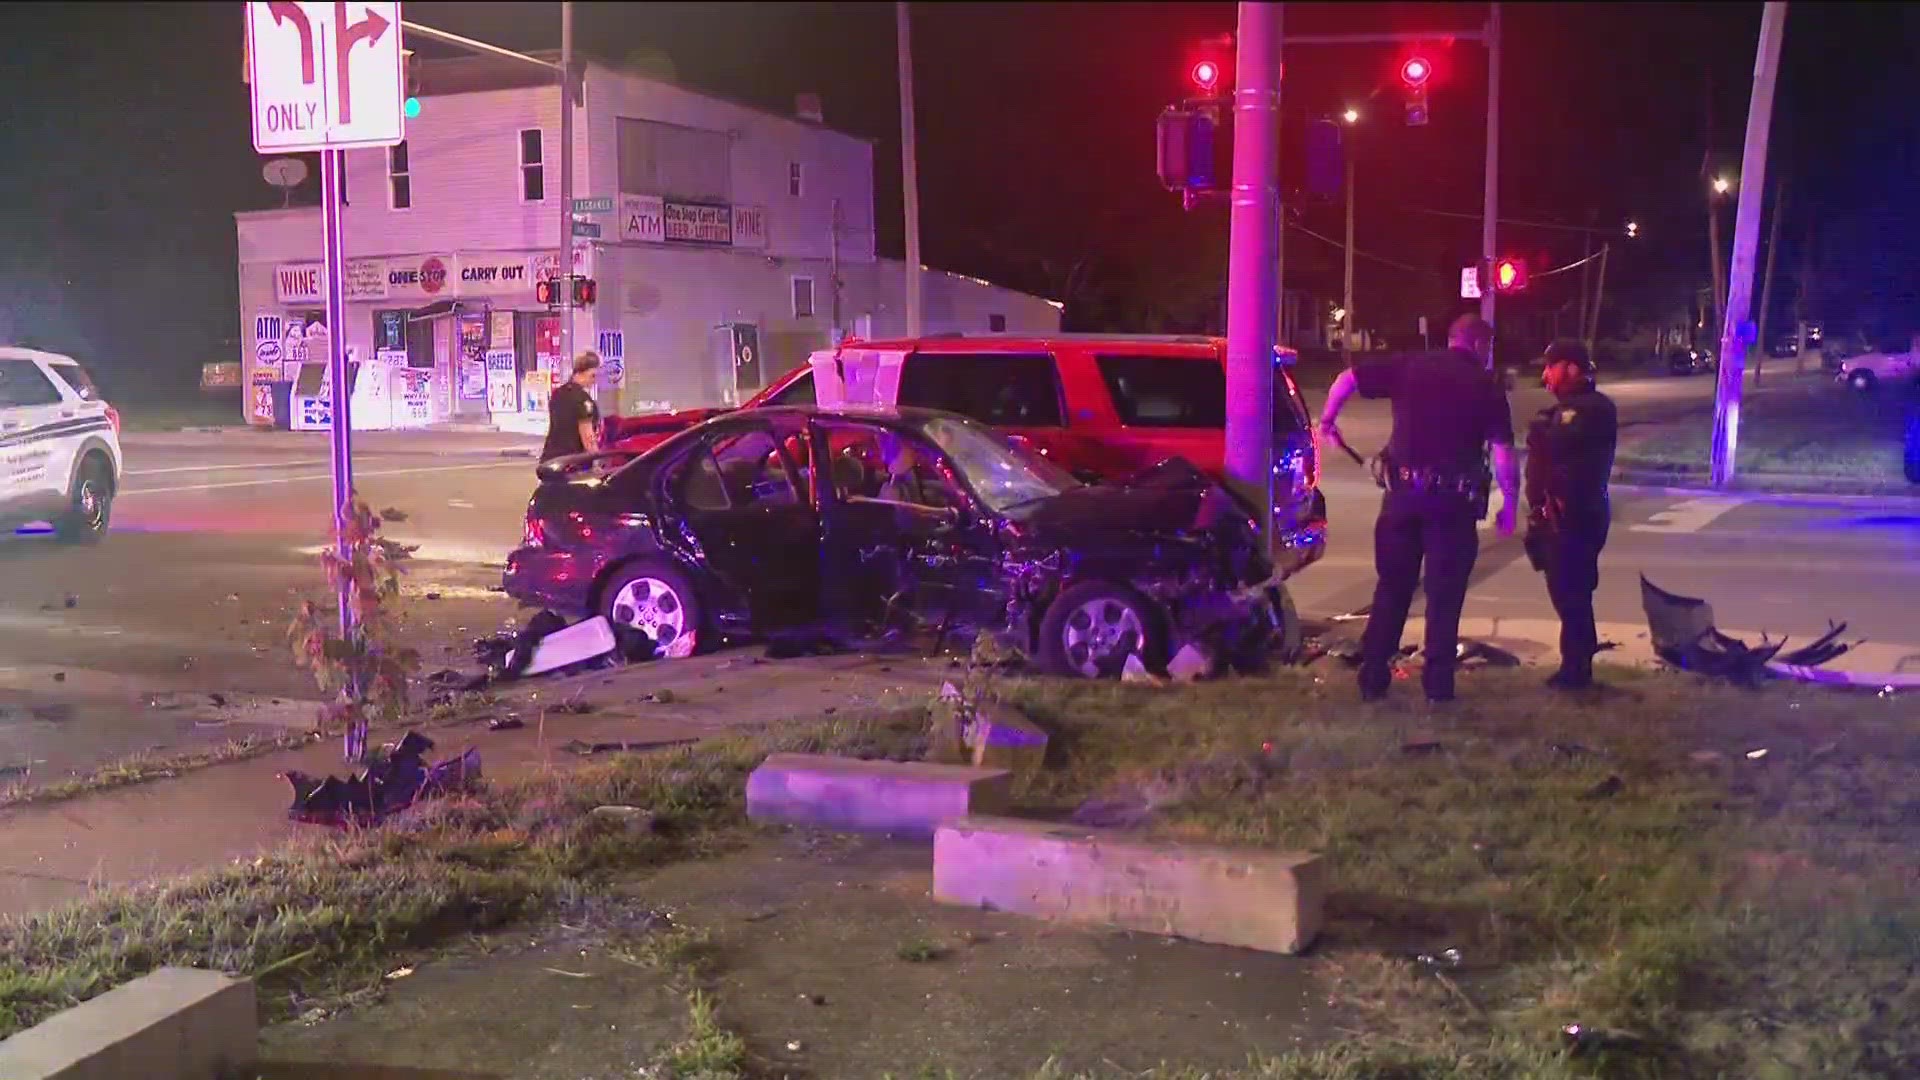 A car and SUV collided with one another, which then caused the car to hit a metal pole, according to police.